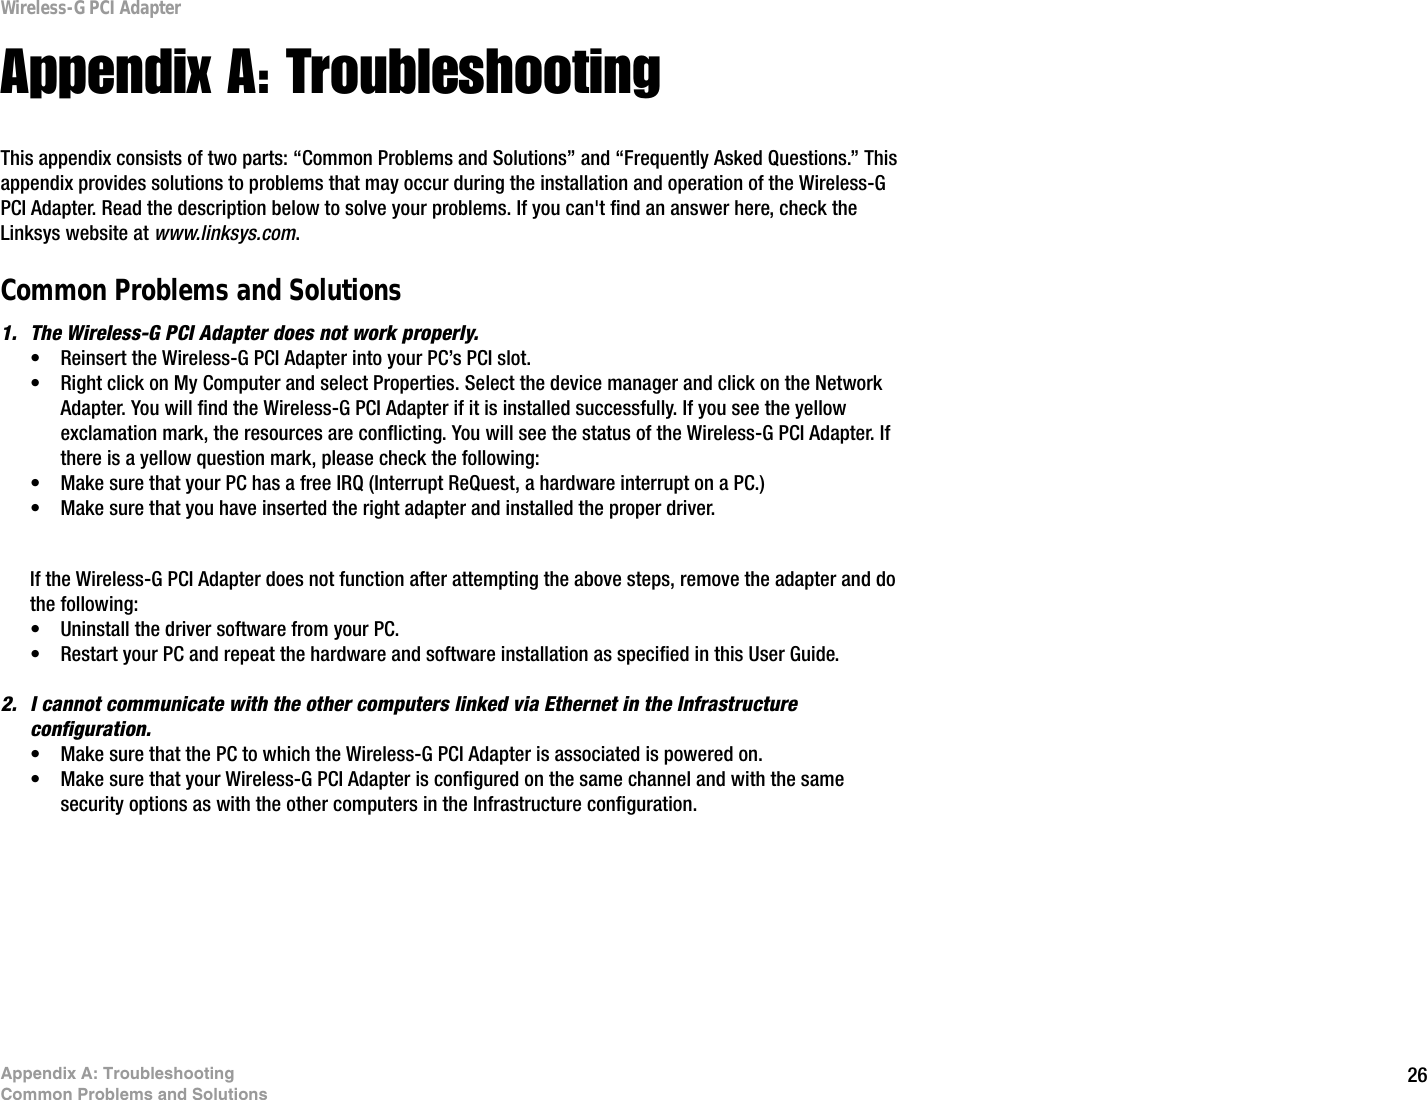 26Appendix A: TroubleshootingCommon Problems and SolutionsWireless-G PCI AdapterAppendix A: TroubleshootingThis appendix consists of two parts: “Common Problems and Solutions” and “Frequently Asked Questions.” This appendix provides solutions to problems that may occur during the installation and operation of the Wireless-G PCI Adapter. Read the description below to solve your problems. If you can&apos;t find an answer here, check the Linksys website at www.linksys.com.Common Problems and Solutions1. The Wireless-G PCI Adapter does not work properly.• Reinsert the Wireless-G PCI Adapter into your PC’s PCI slot.• Right click on My Computer and select Properties. Select the device manager and click on the Network Adapter. You will find the Wireless-G PCI Adapter if it is installed successfully. If you see the yellow exclamation mark, the resources are conflicting. You will see the status of the Wireless-G PCI Adapter. If there is a yellow question mark, please check the following:• Make sure that your PC has a free IRQ (Interrupt ReQuest, a hardware interrupt on a PC.) • Make sure that you have inserted the right adapter and installed the proper driver.If the Wireless-G PCI Adapter does not function after attempting the above steps, remove the adapter and do the following:• Uninstall the driver software from your PC.• Restart your PC and repeat the hardware and software installation as specified in this User Guide.2. I cannot communicate with the other computers linked via Ethernet in the Infrastructure configuration.• Make sure that the PC to which the Wireless-G PCI Adapter is associated is powered on.• Make sure that your Wireless-G PCI Adapter is configured on the same channel and with the same security options as with the other computers in the Infrastructure configuration. 